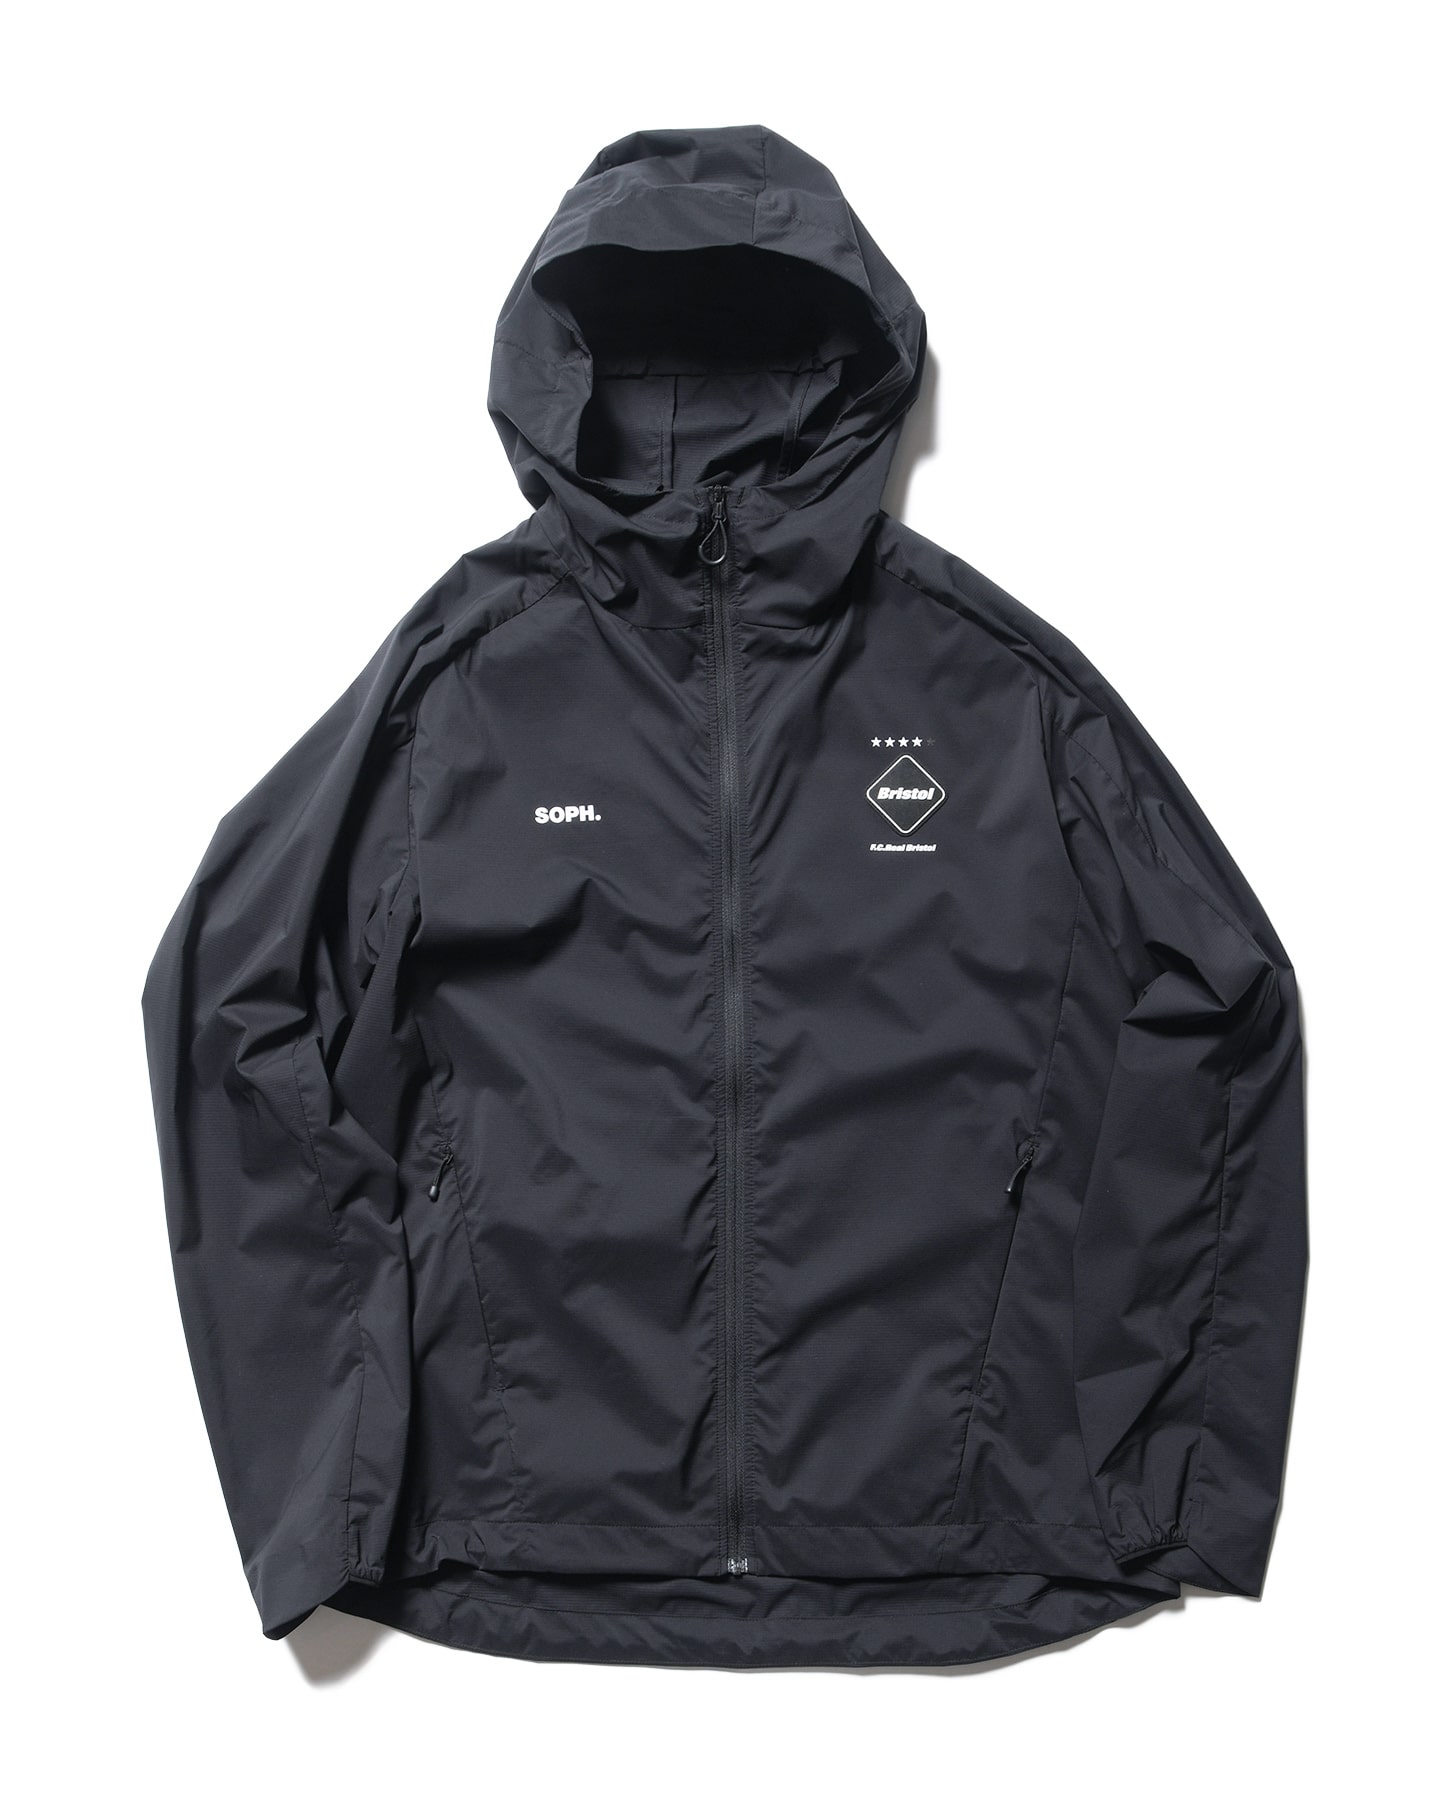 F.C.Real Bristol ULTRALIGHT JACKET fcrb-www.coumes-spring.co.uk